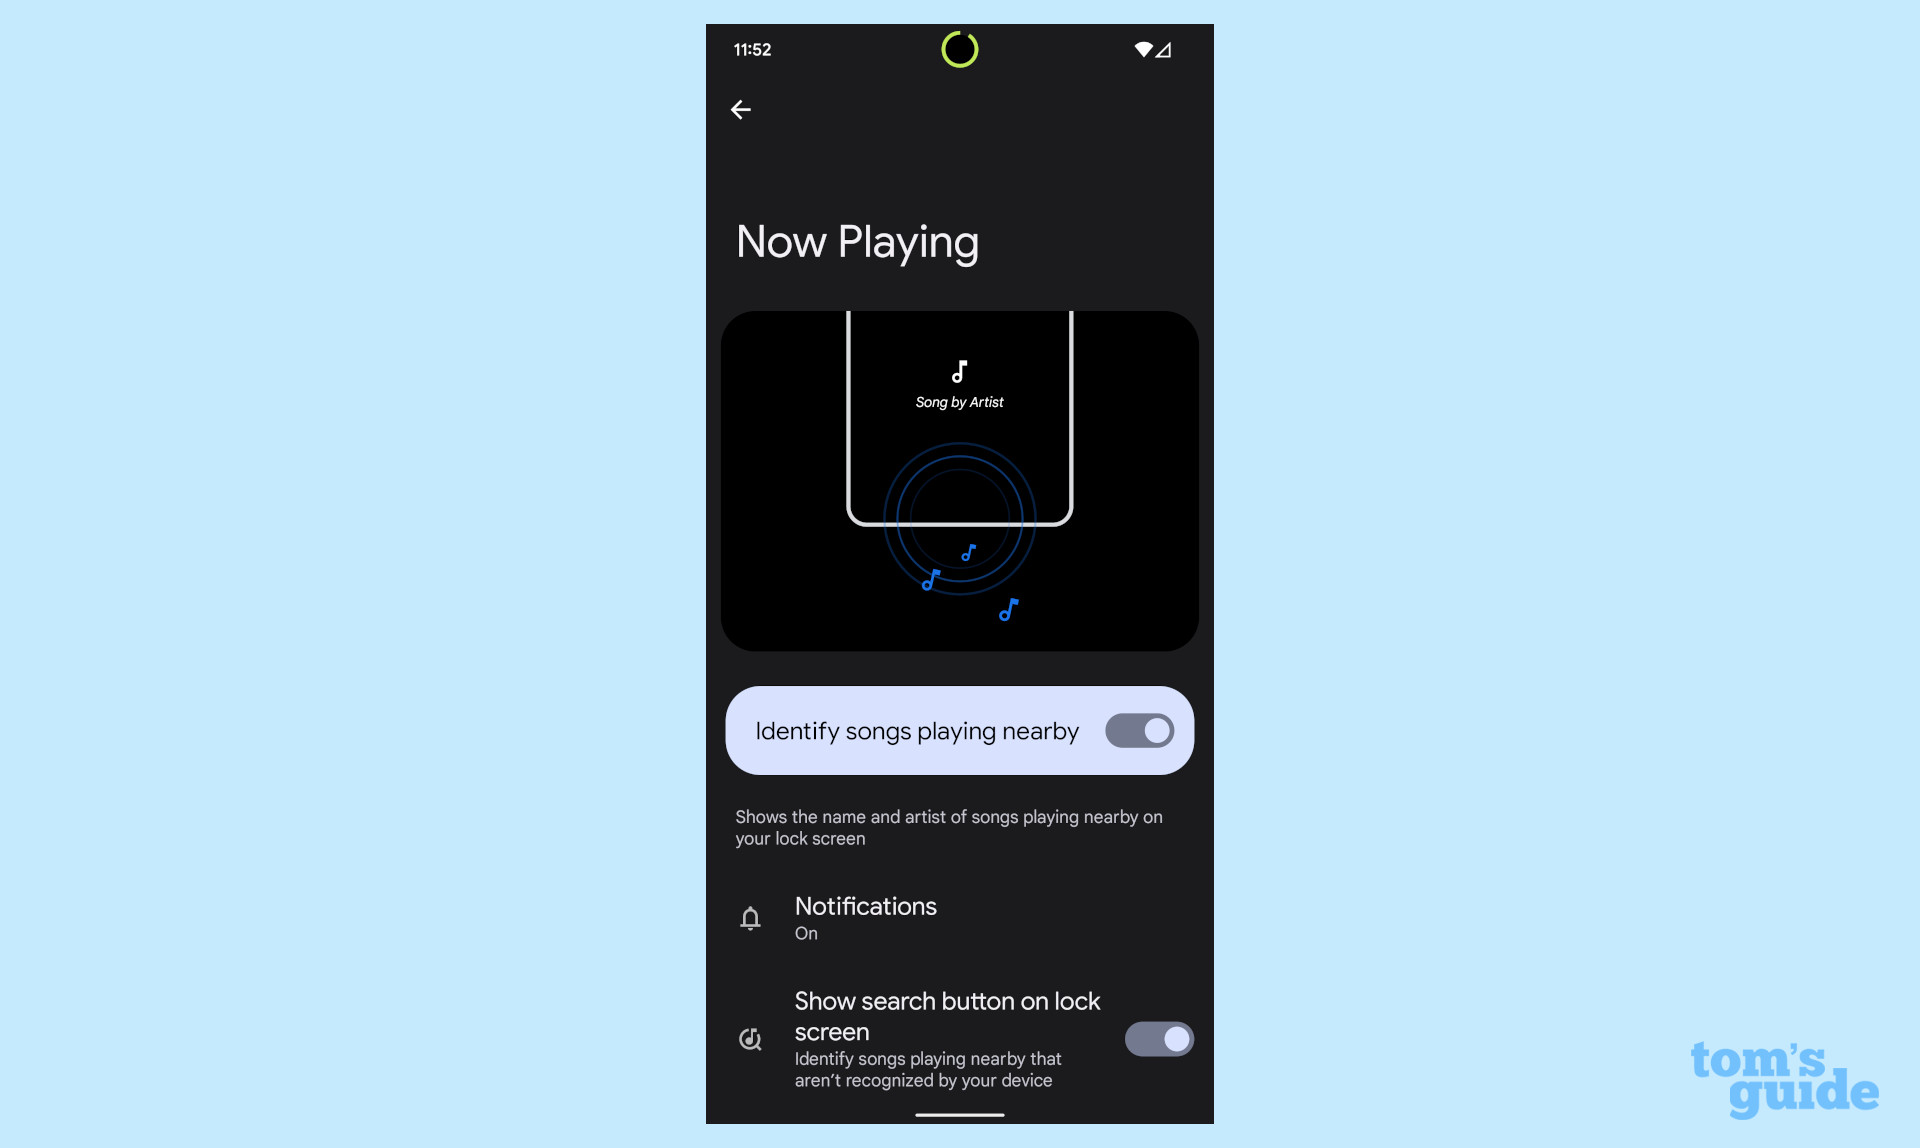 pixel 6 features to enable: now playing